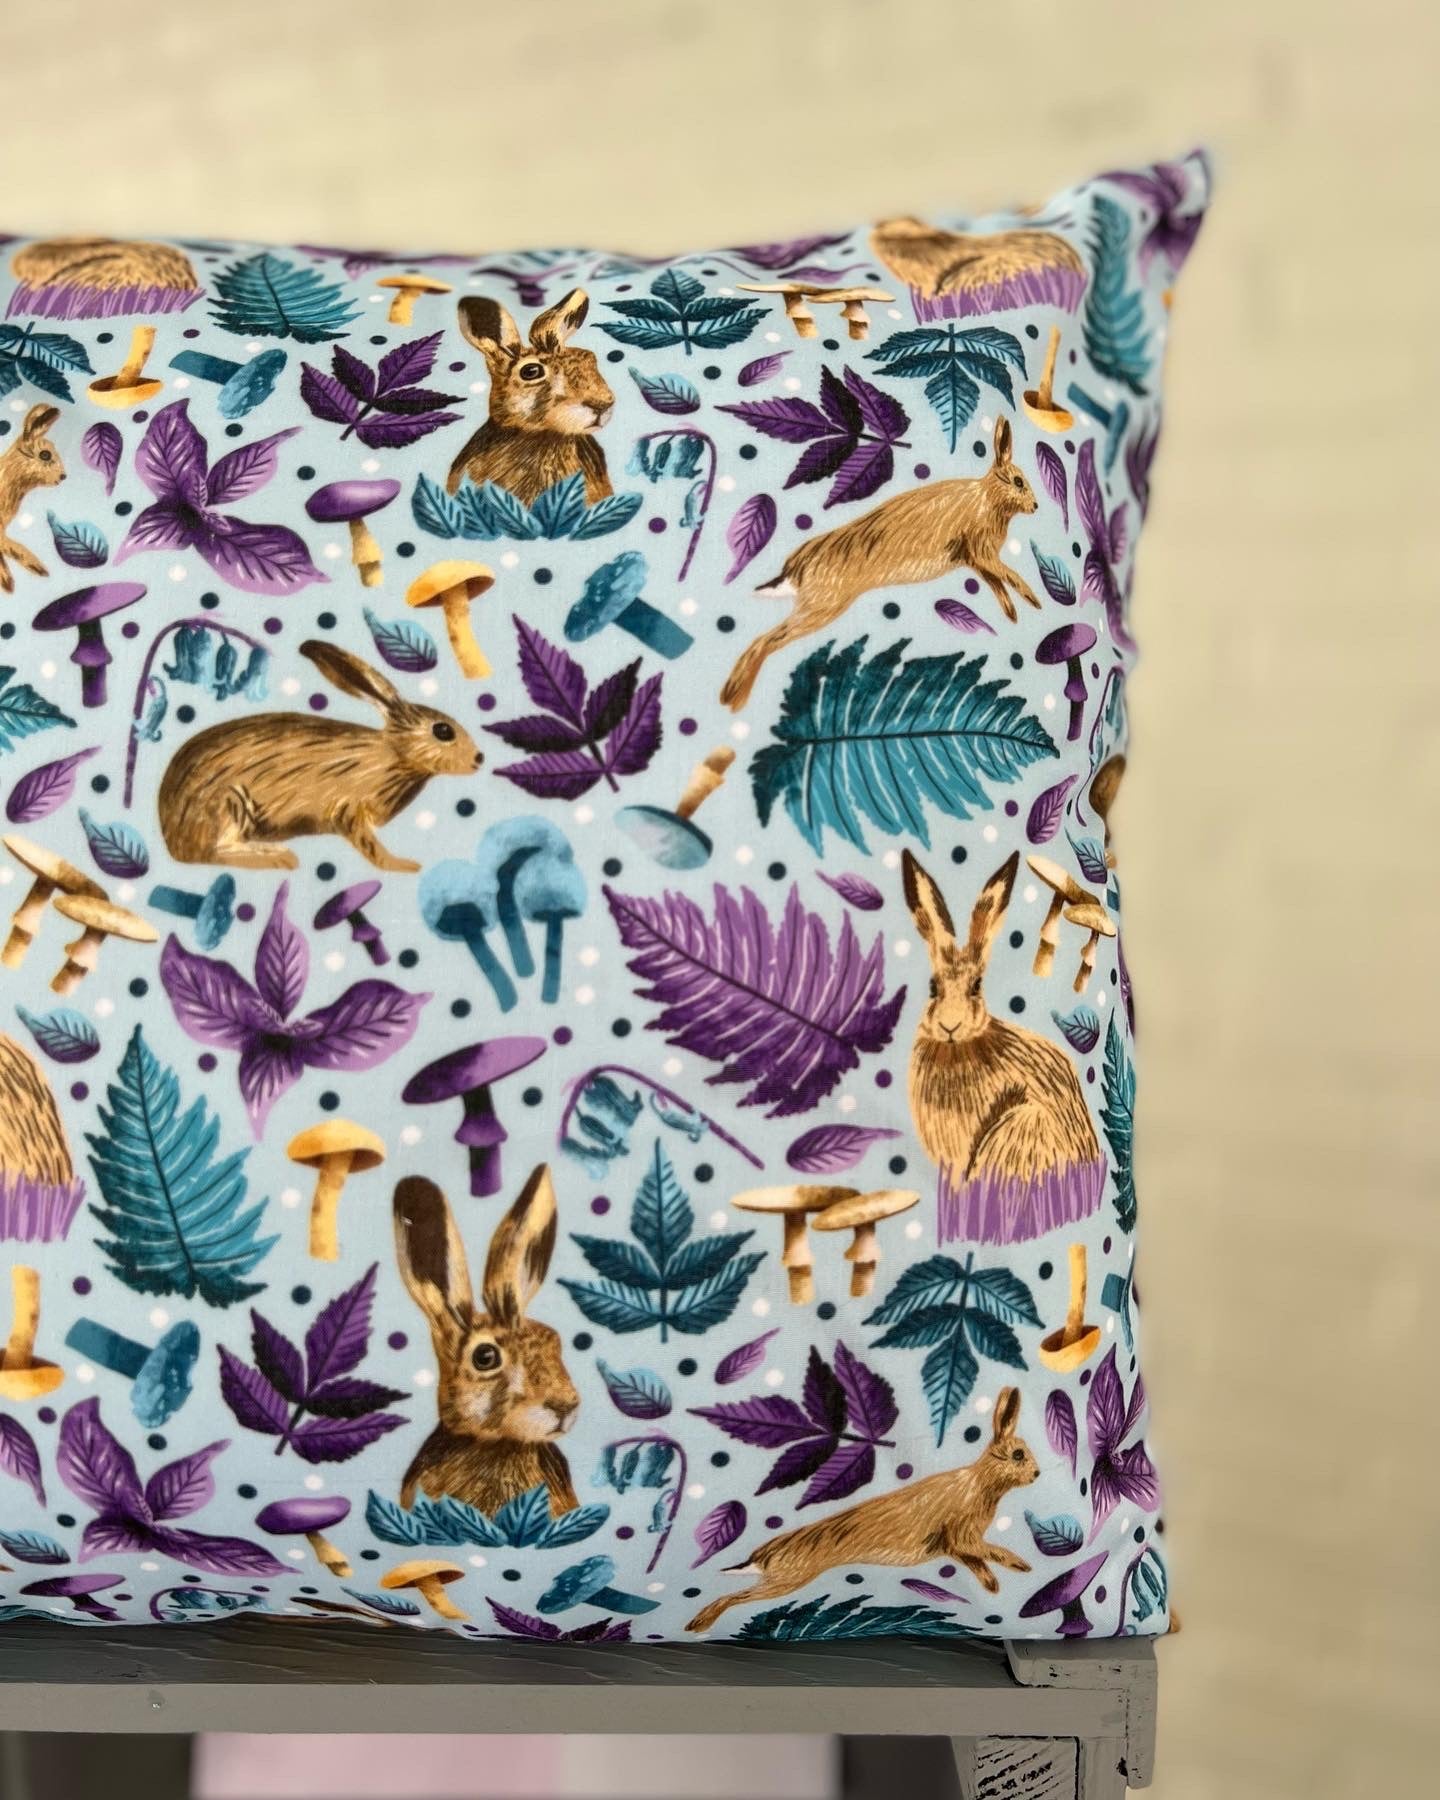 Shop rabbit gifts with our decorative pillow for a sofa with the lovely hare pattern on it. This hare cushion cover is ideal as a gift for someone who loves hares.